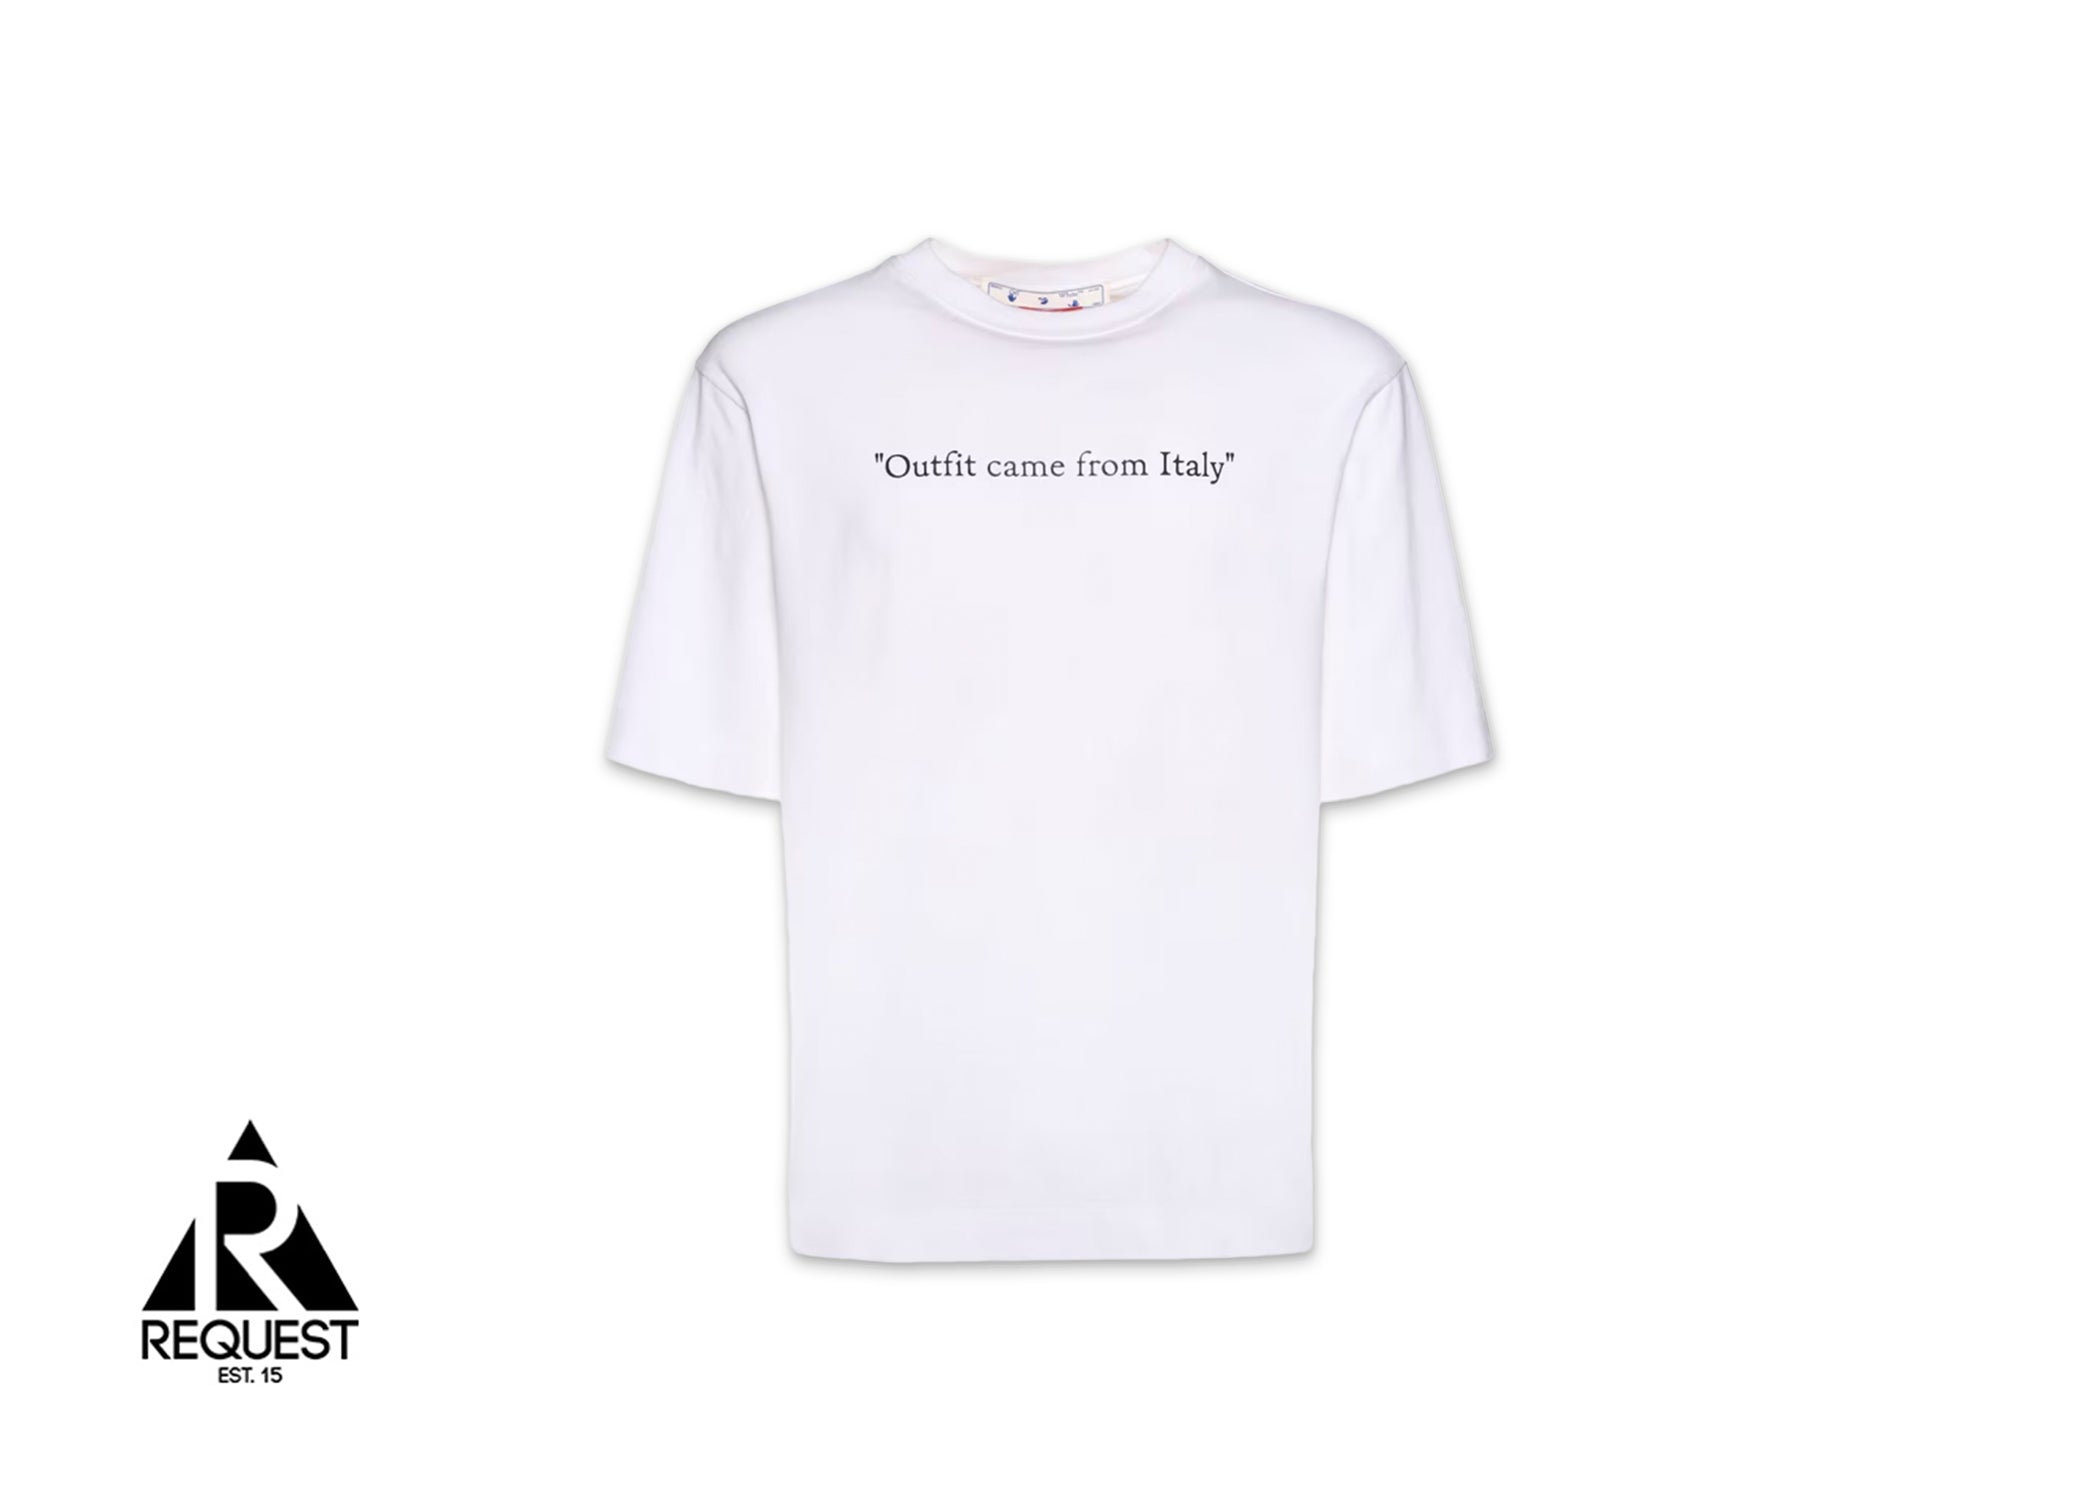 Off-White "Outfit Came From Italy" Print T-Shirt "White/Black"